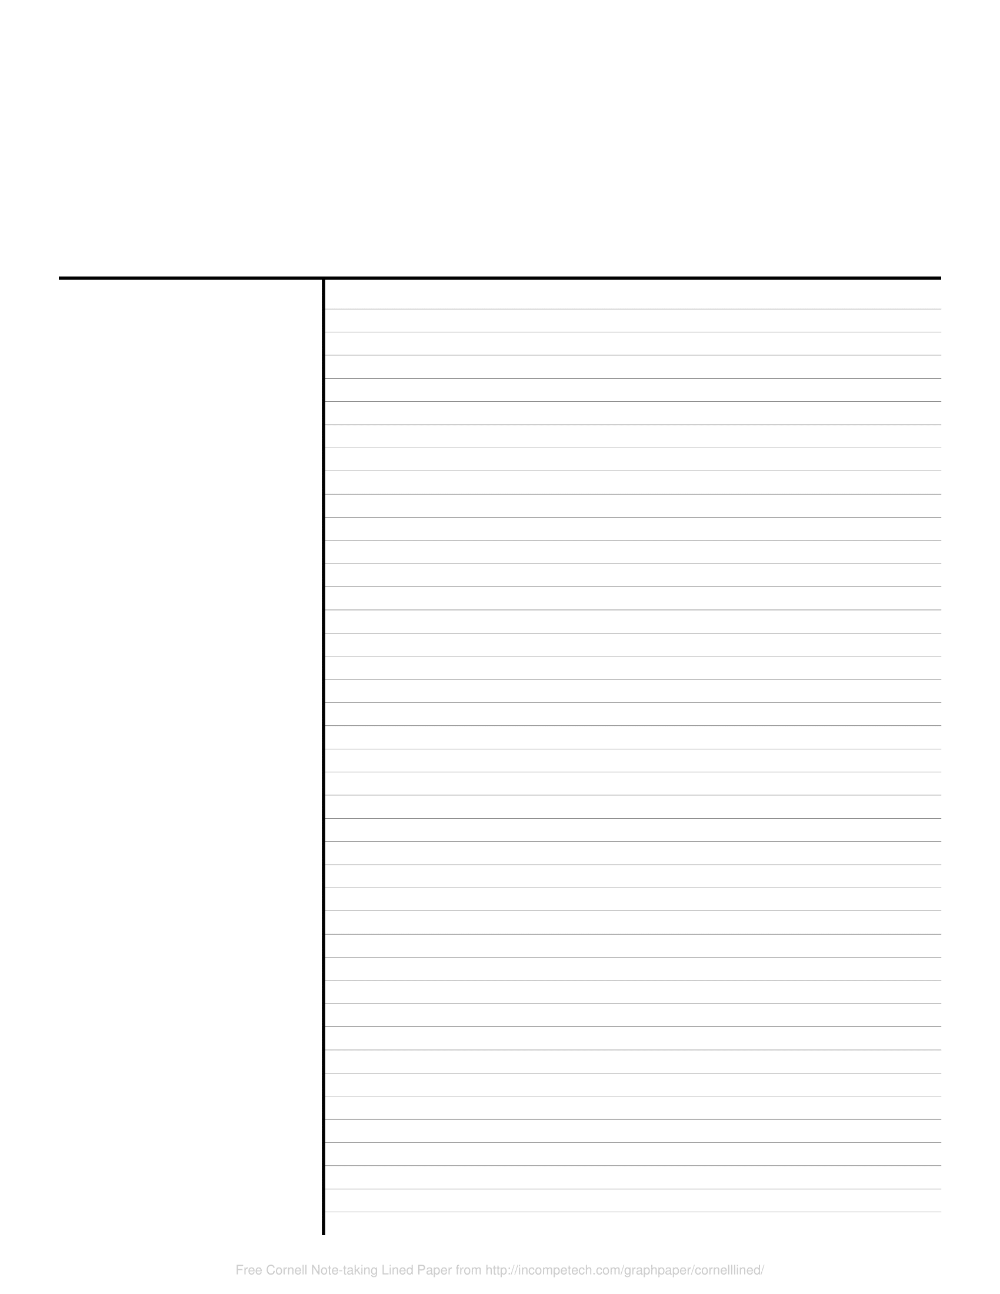 Free Online Graph Paper Cornell Note taking Lined Note Paper Graph 